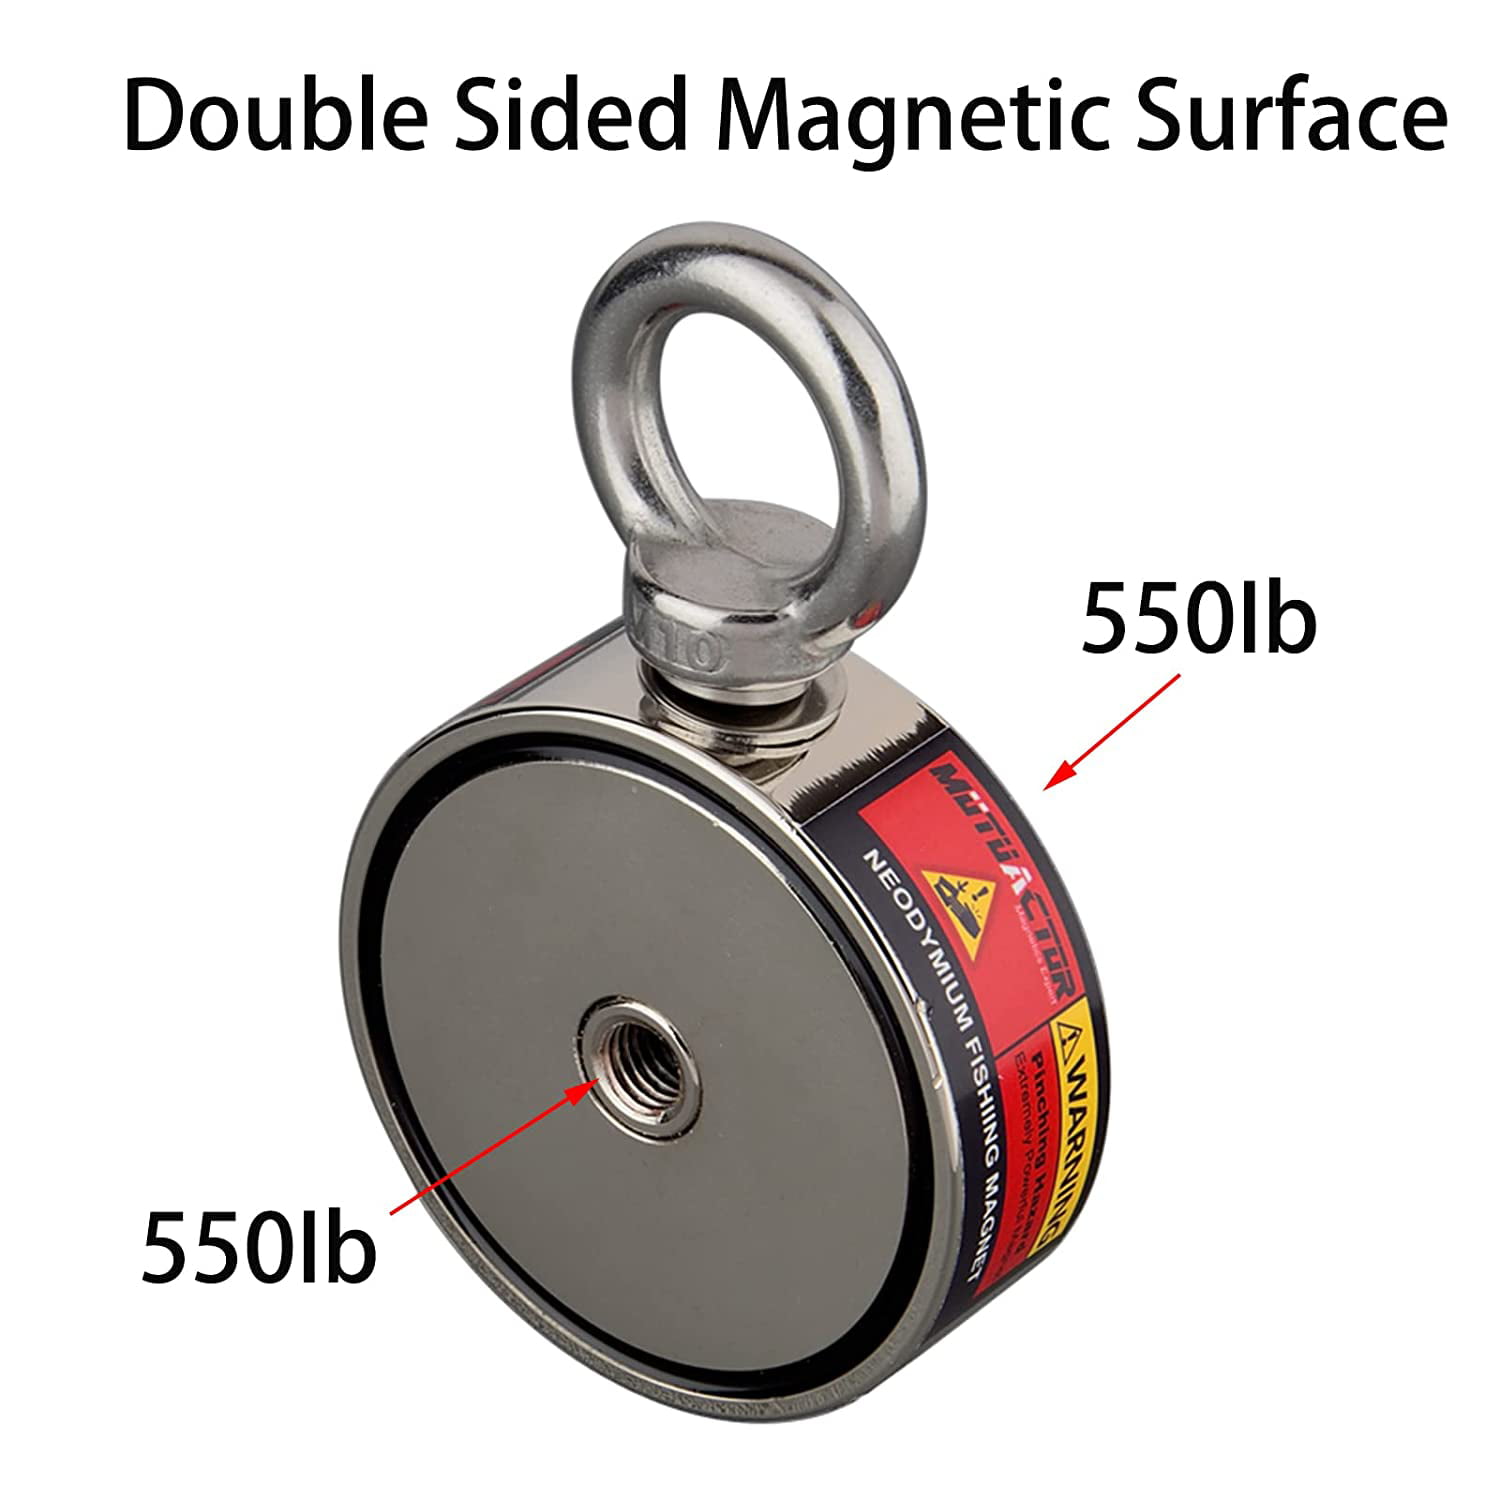  MUTUACTOR Neodymium Fishing Magnet,Double Sided Combined  1100lbs Powerful Fishing Magnet Heavy Duty with 65Ft Salvage  Rope,Durability Gloves,Waterproof Bag for Retrieving Tools Find Treasure :  Industrial & Scientific